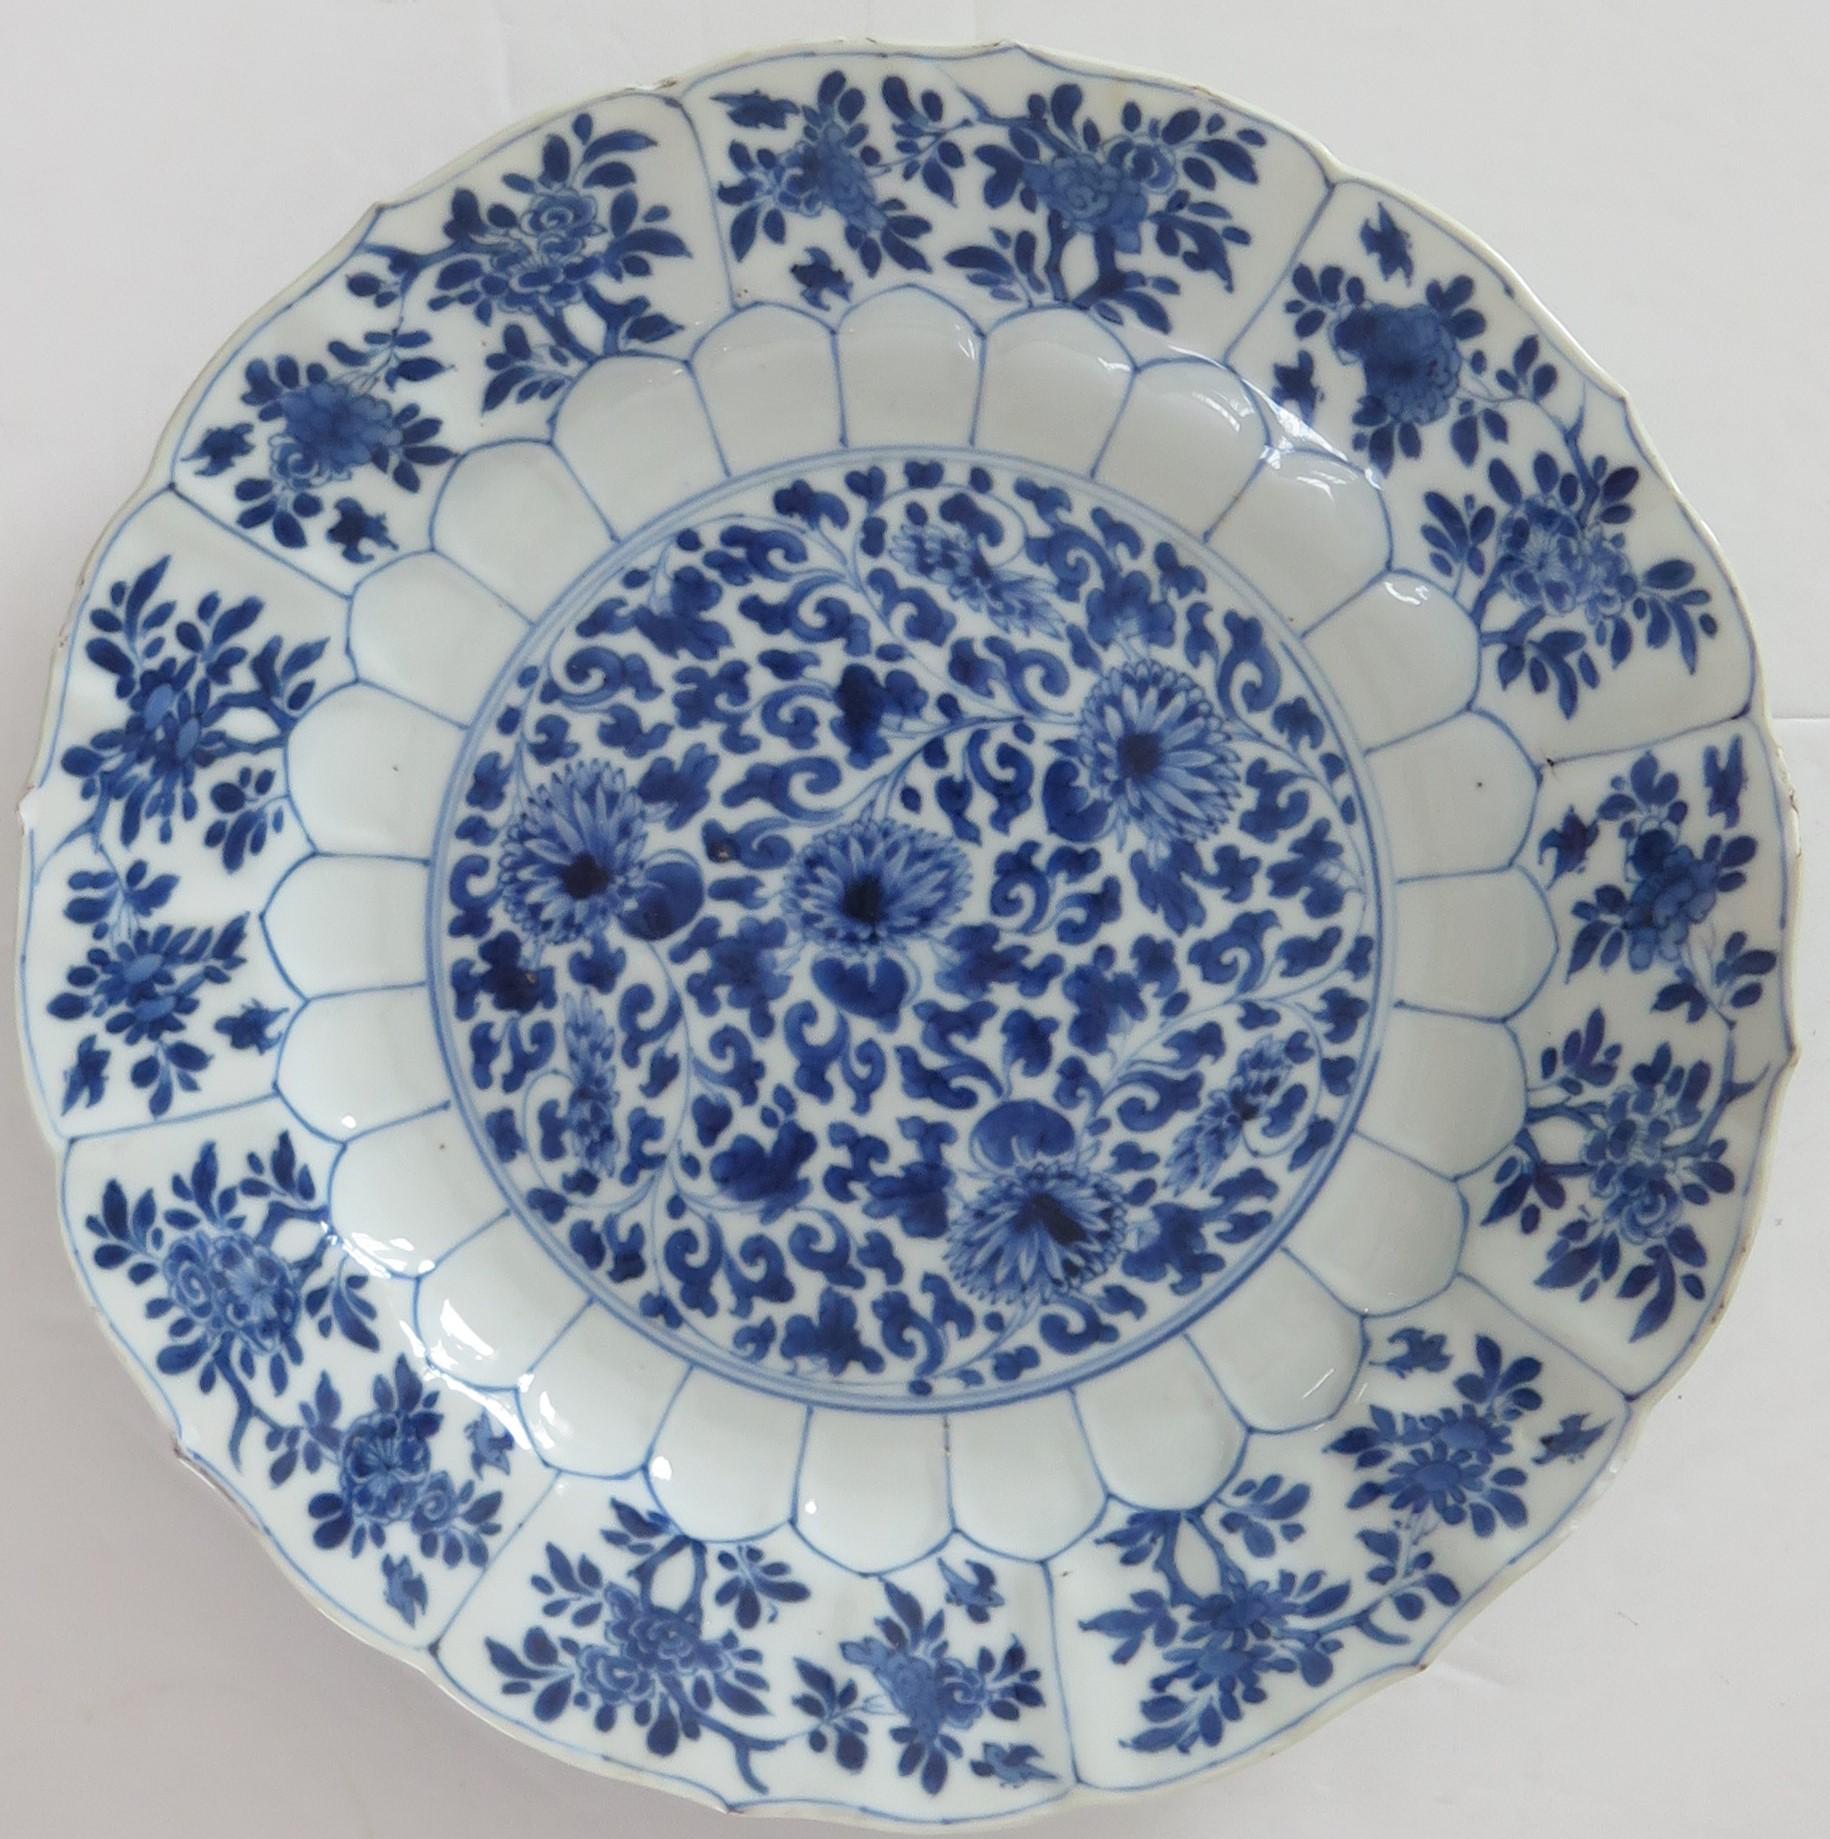 Hand-Painted Qing Kangxi Chinese Porcelain Plate Blue & White Mark & Period Pl 2, circa 1680